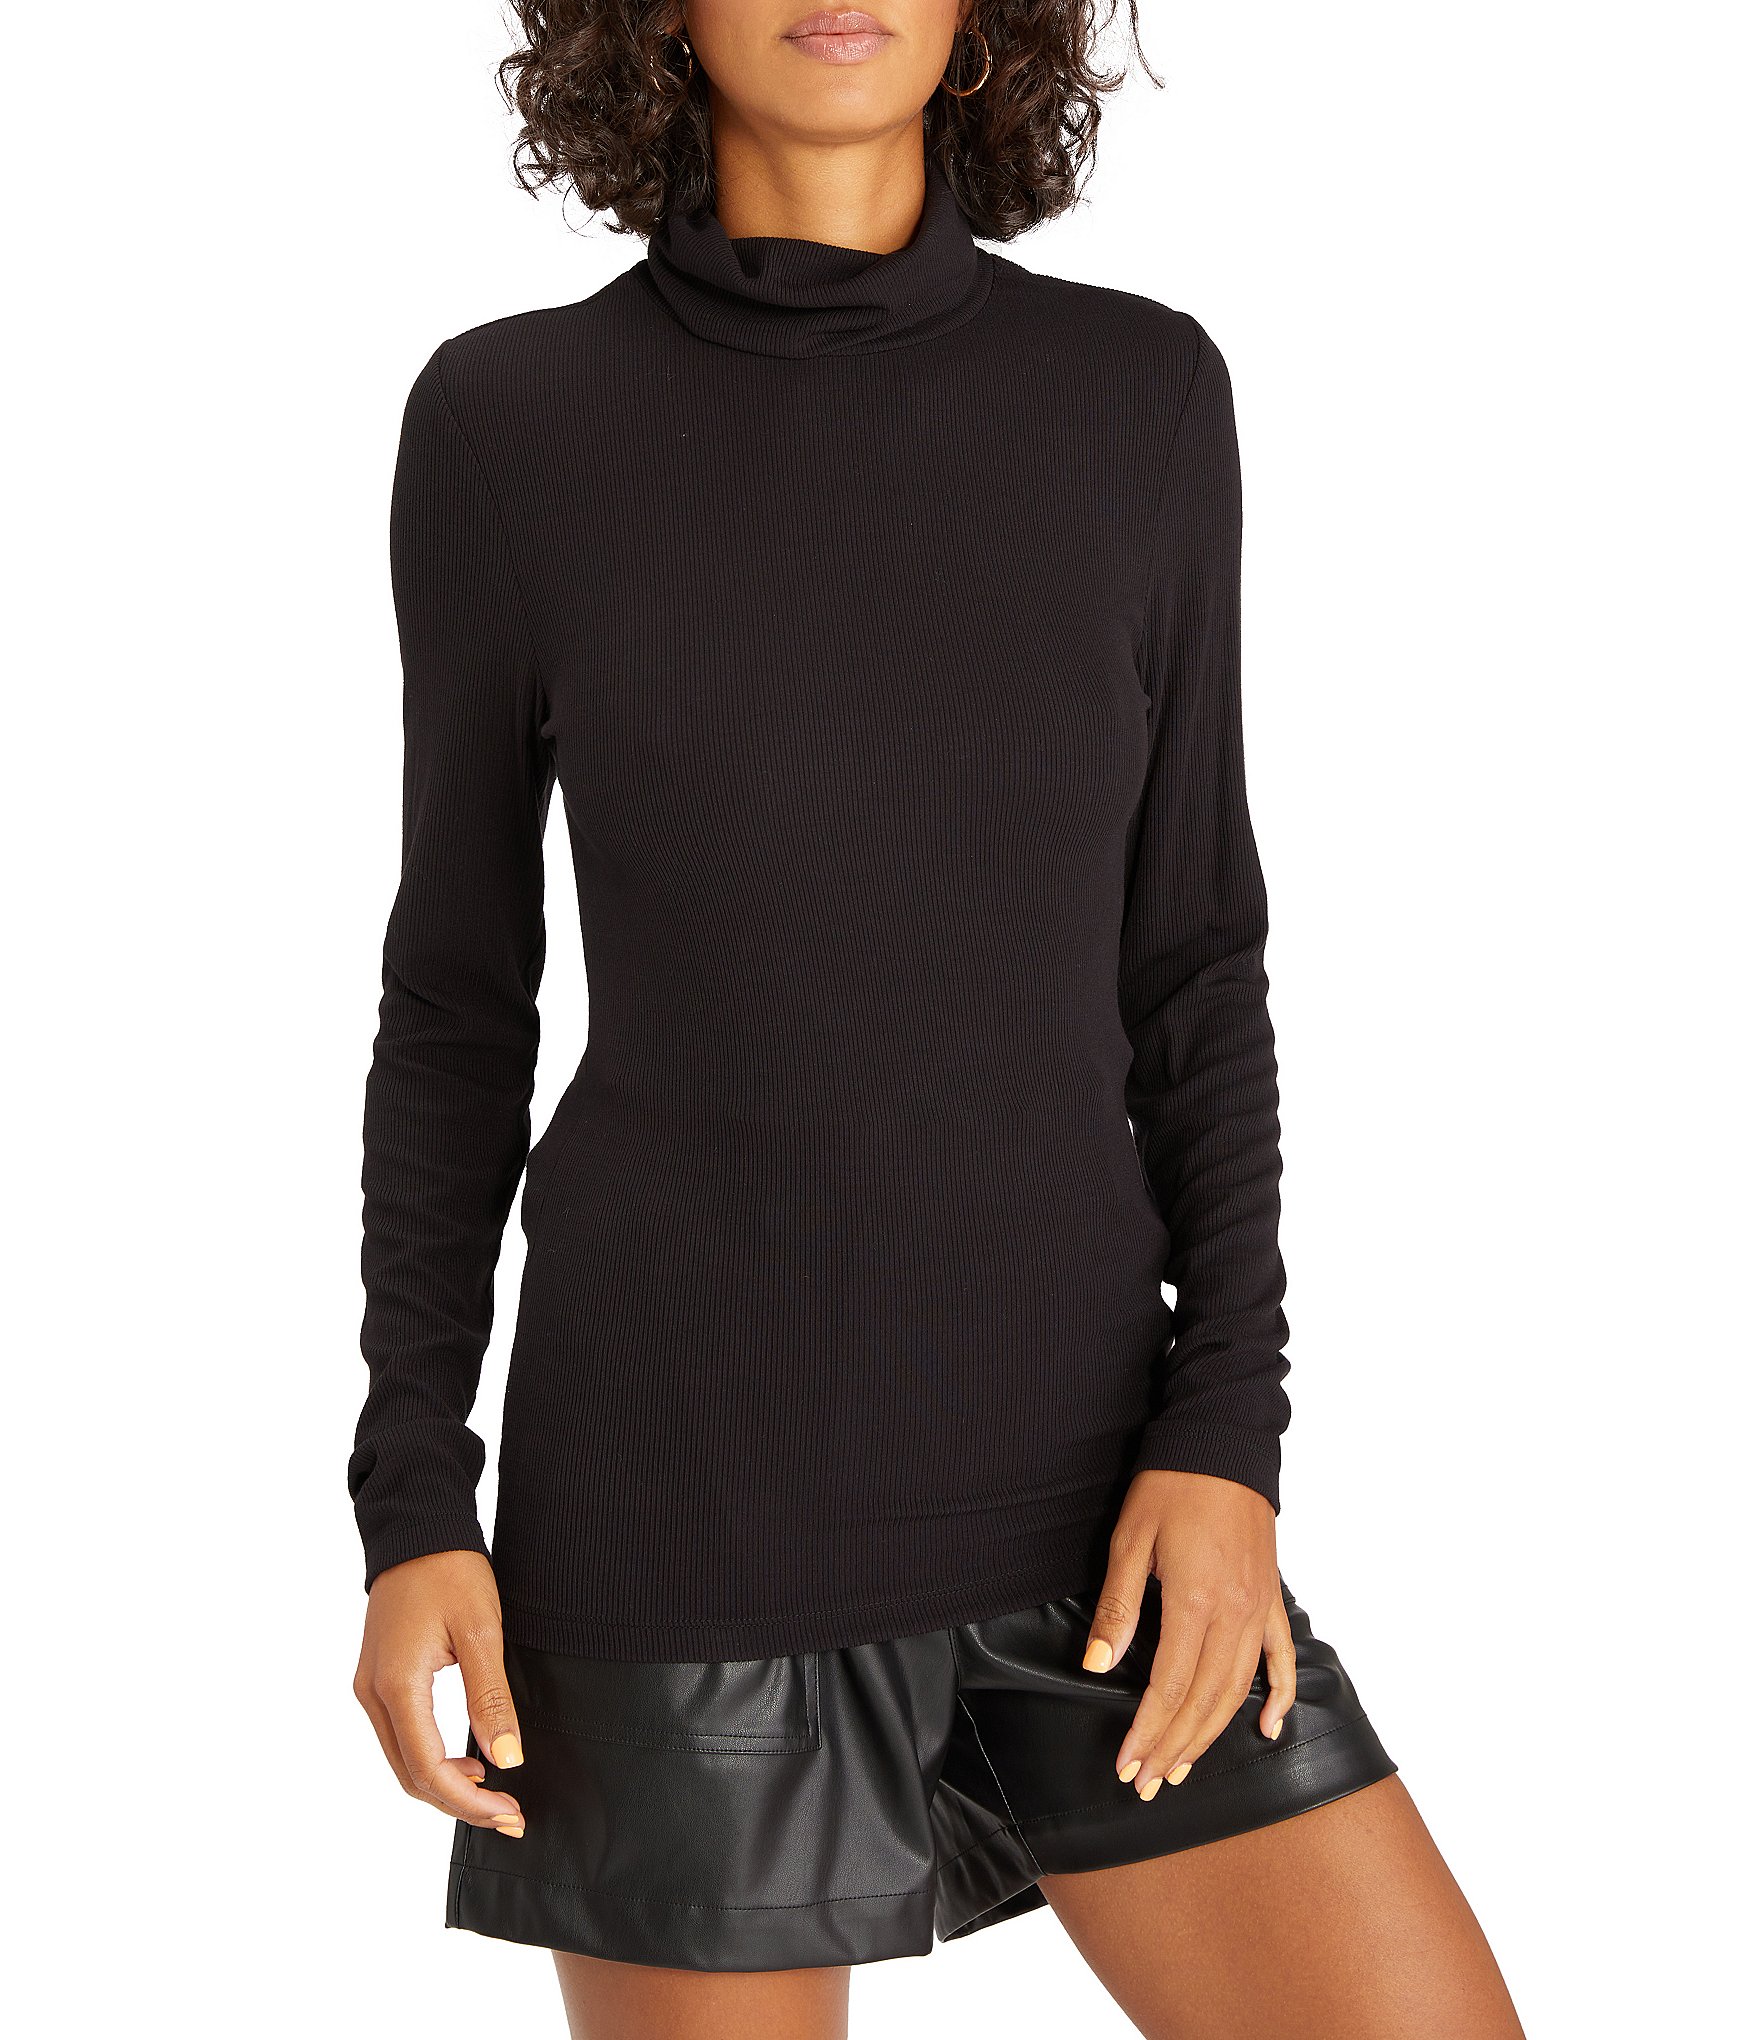 Women's Black Turtle Neck Knitted Ribbed Top